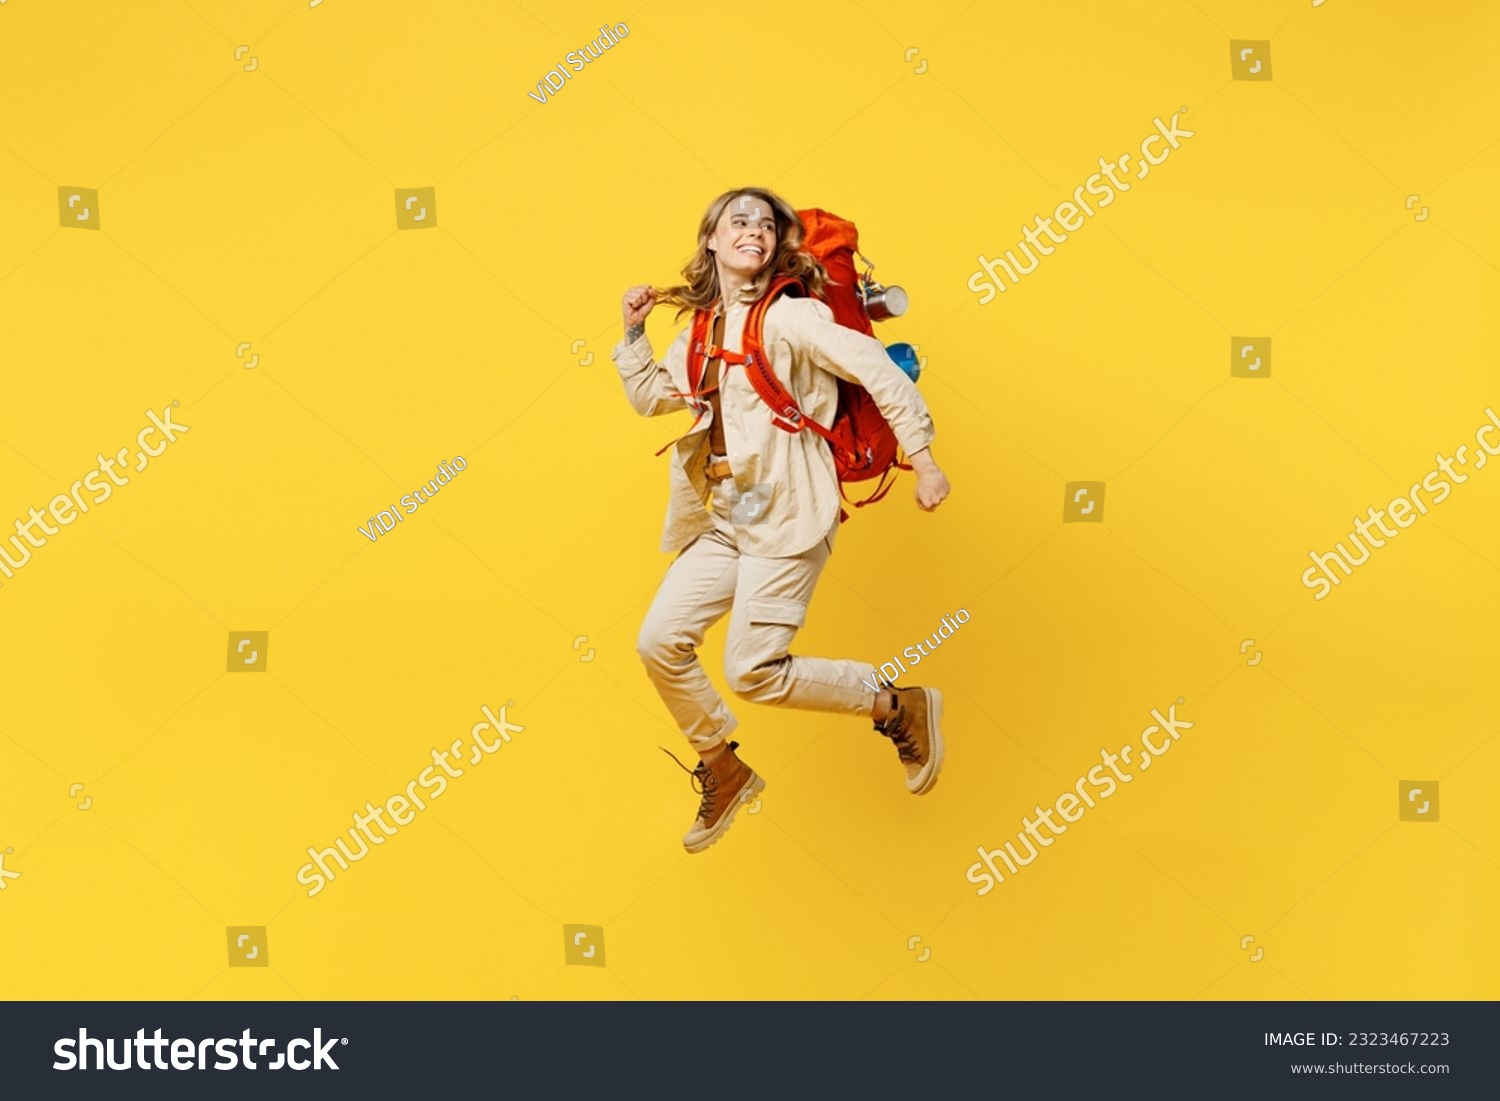 Full body young woman carry bag with stuff mat jump high look aside on area isolated on plain yellow background. Tourist leads active lifestyle walk on spare time. Hiking trek rest travel trip concept #2323467223